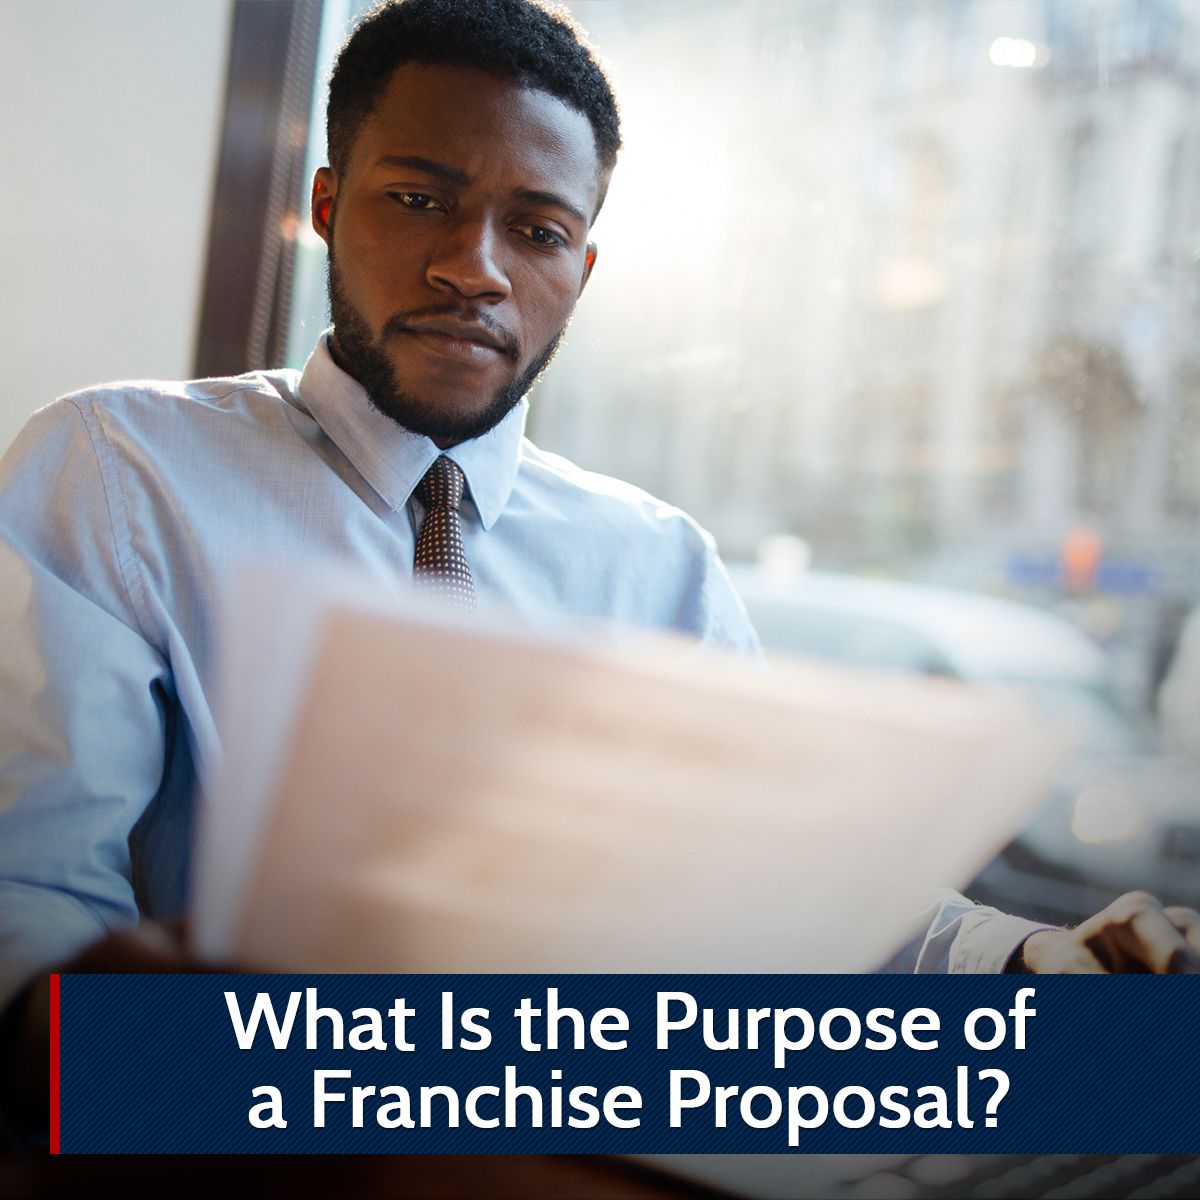 What Is the Purpose of a Franchise Proposal?